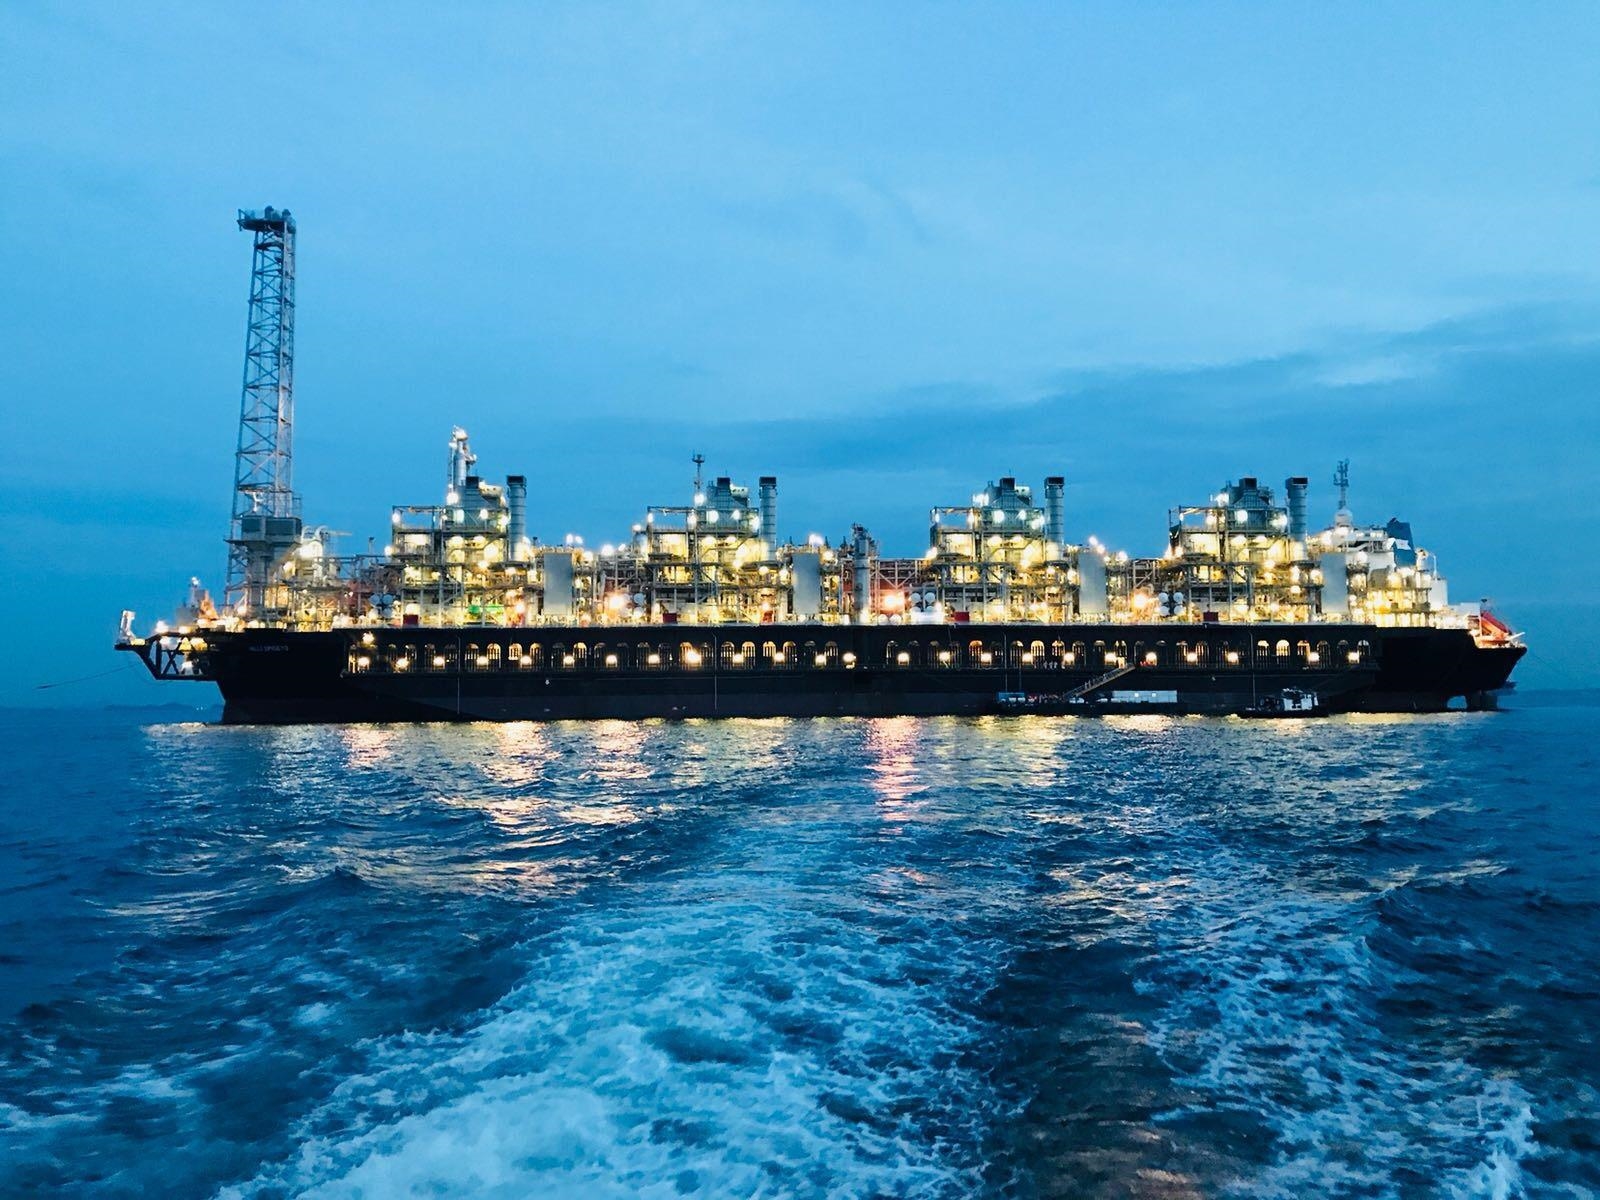 FLNG Hilli Episeyo ships its first cargo from Cameroon